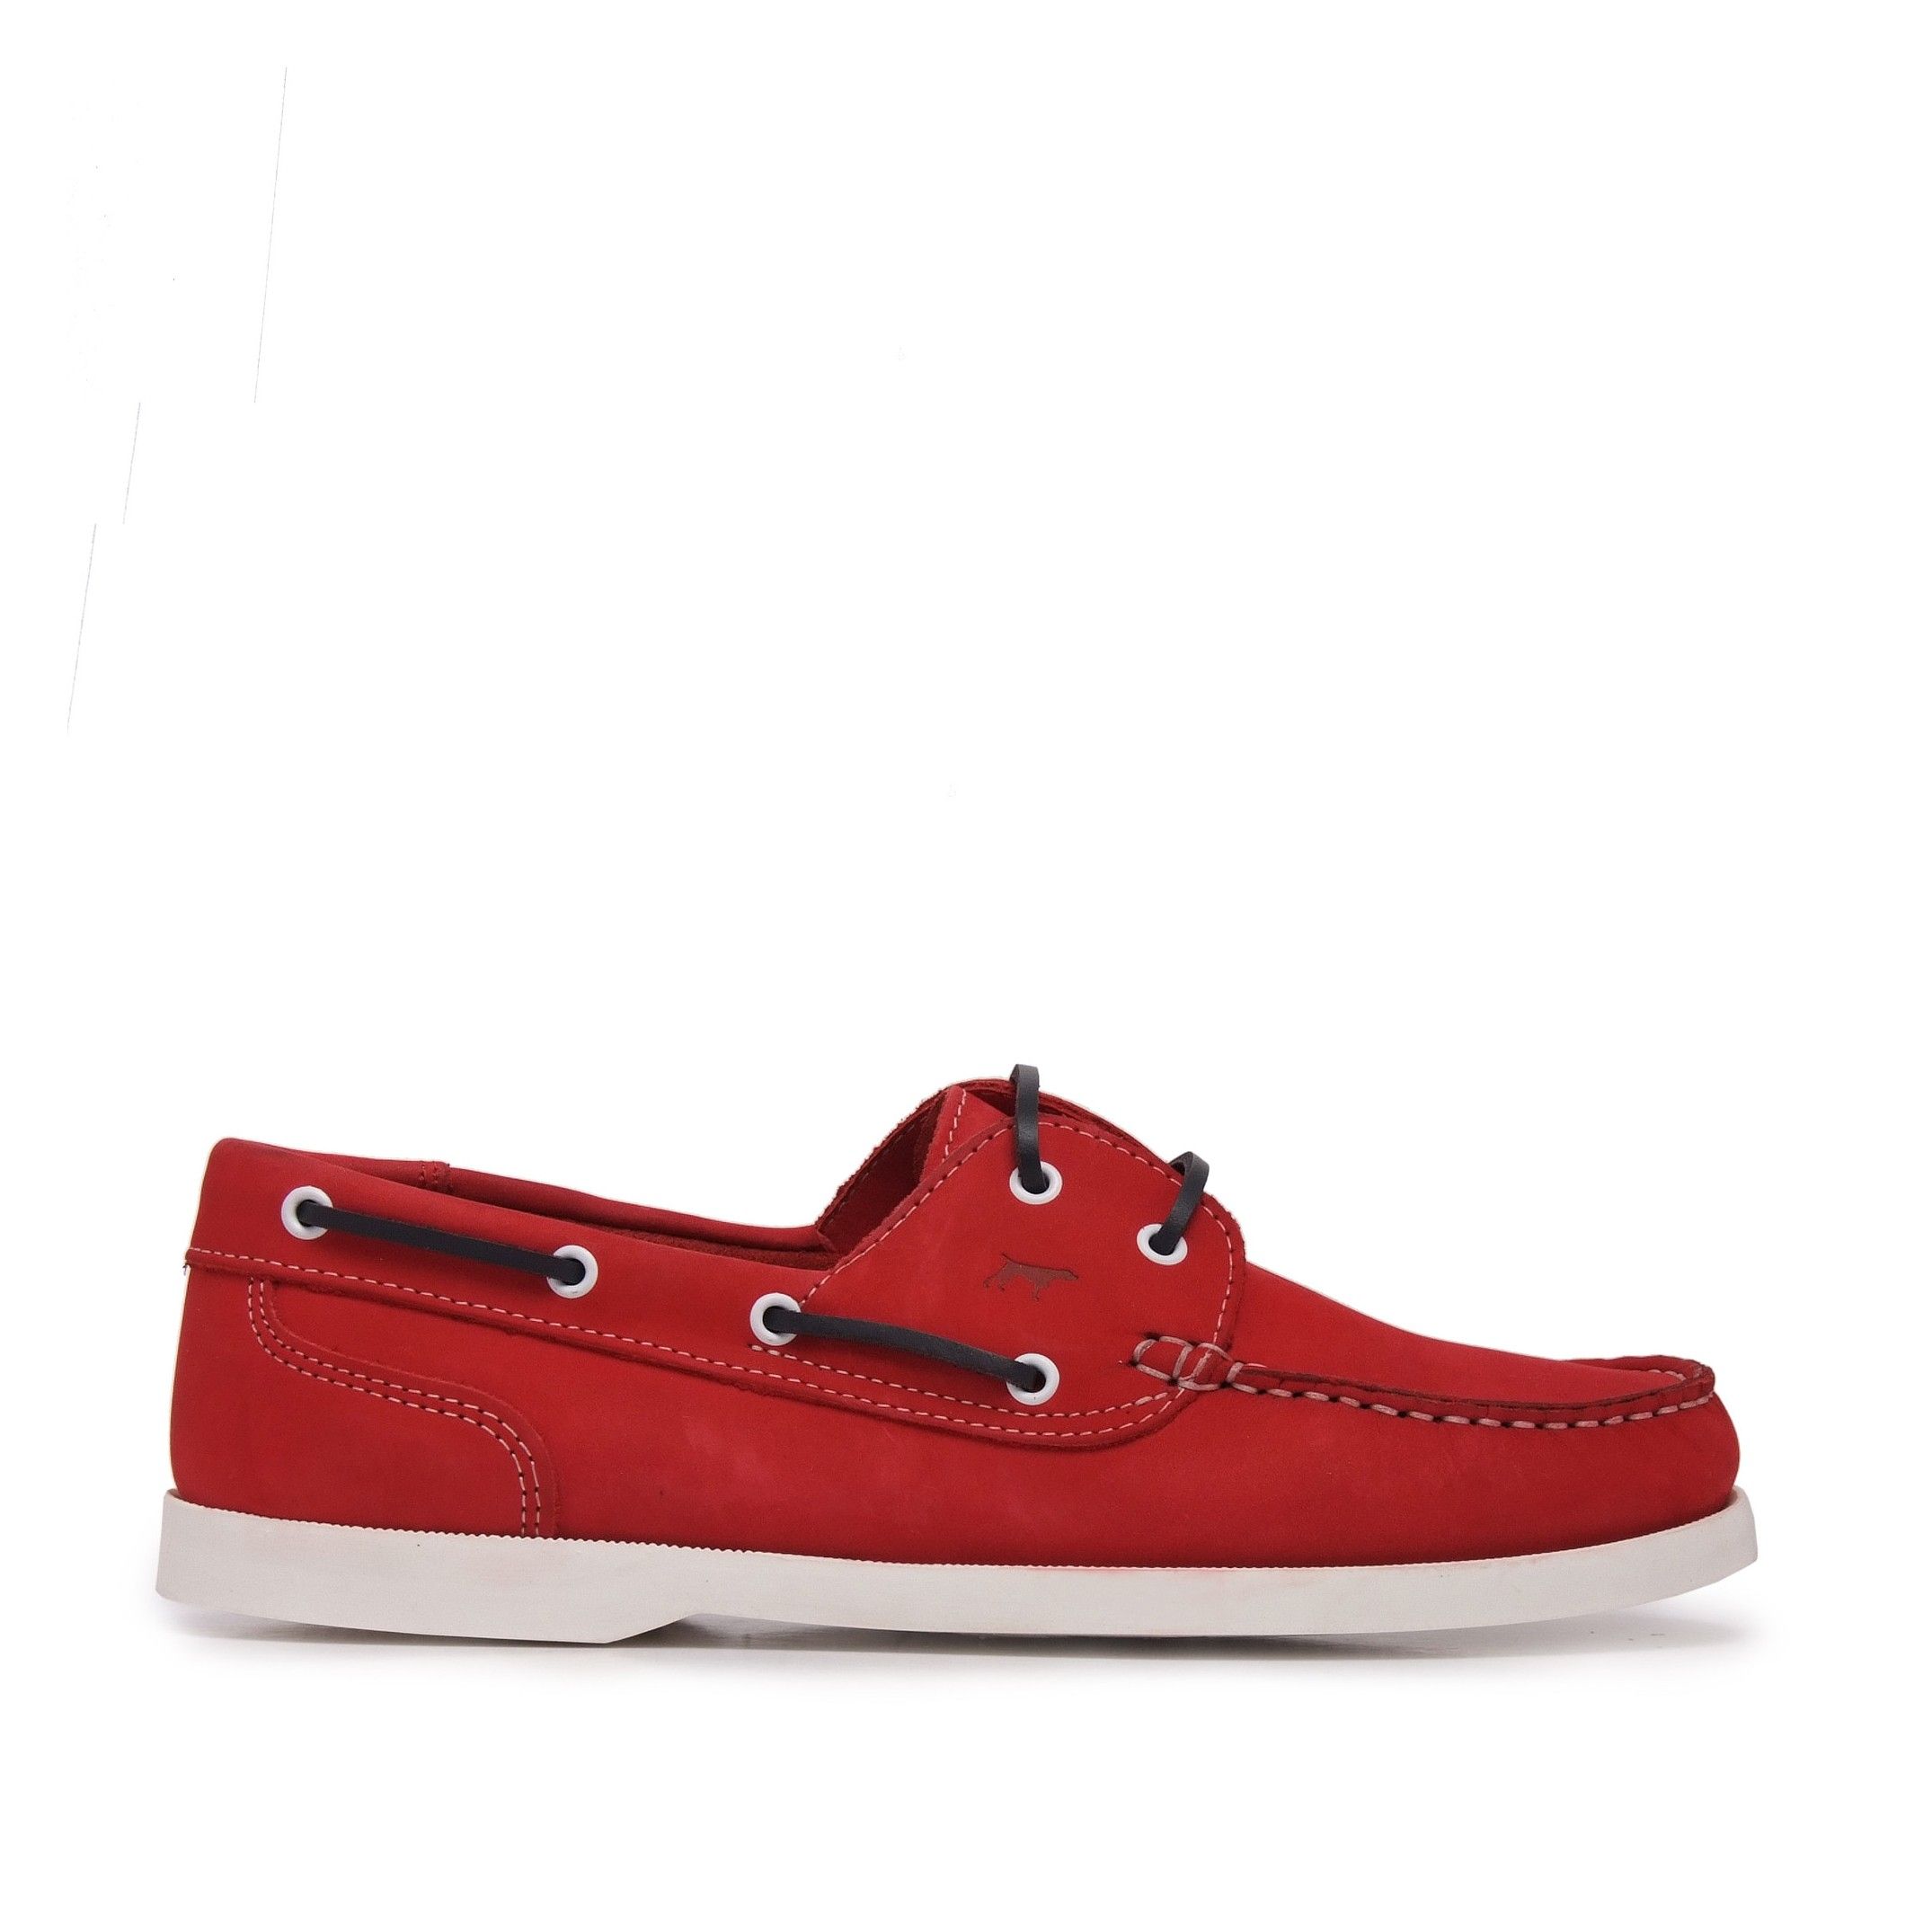 Lace up boat sport shoes. Upper leather nubuck. Inner: leather. Insole: leather. Sole: Non -skid rubber MADE IN PORTUGAL.